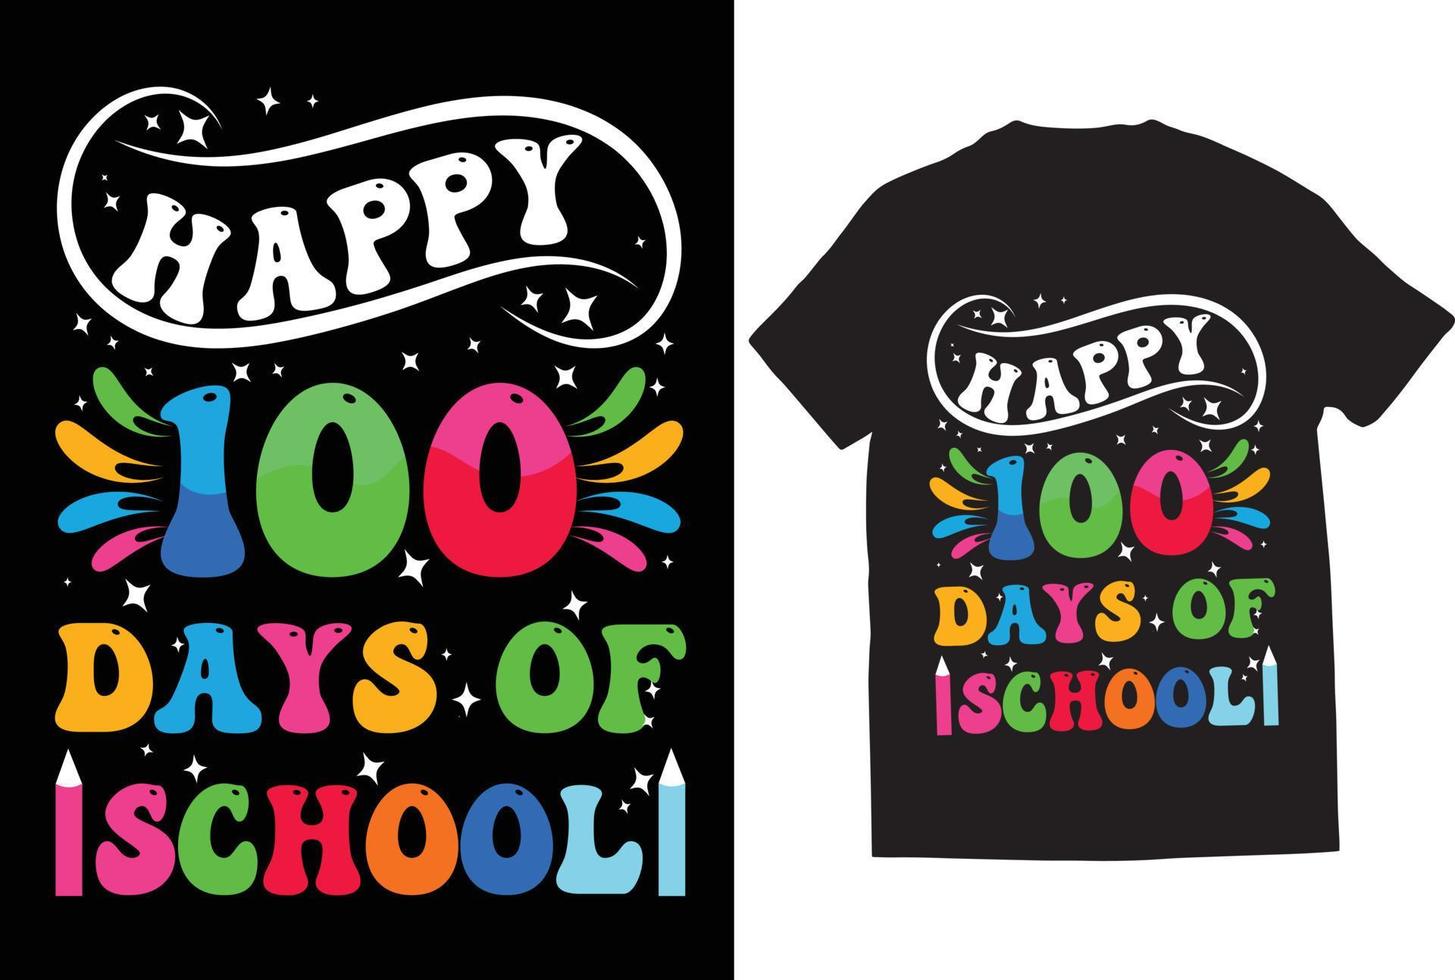 Happy 100 day of school t-shirt design print ready vector file